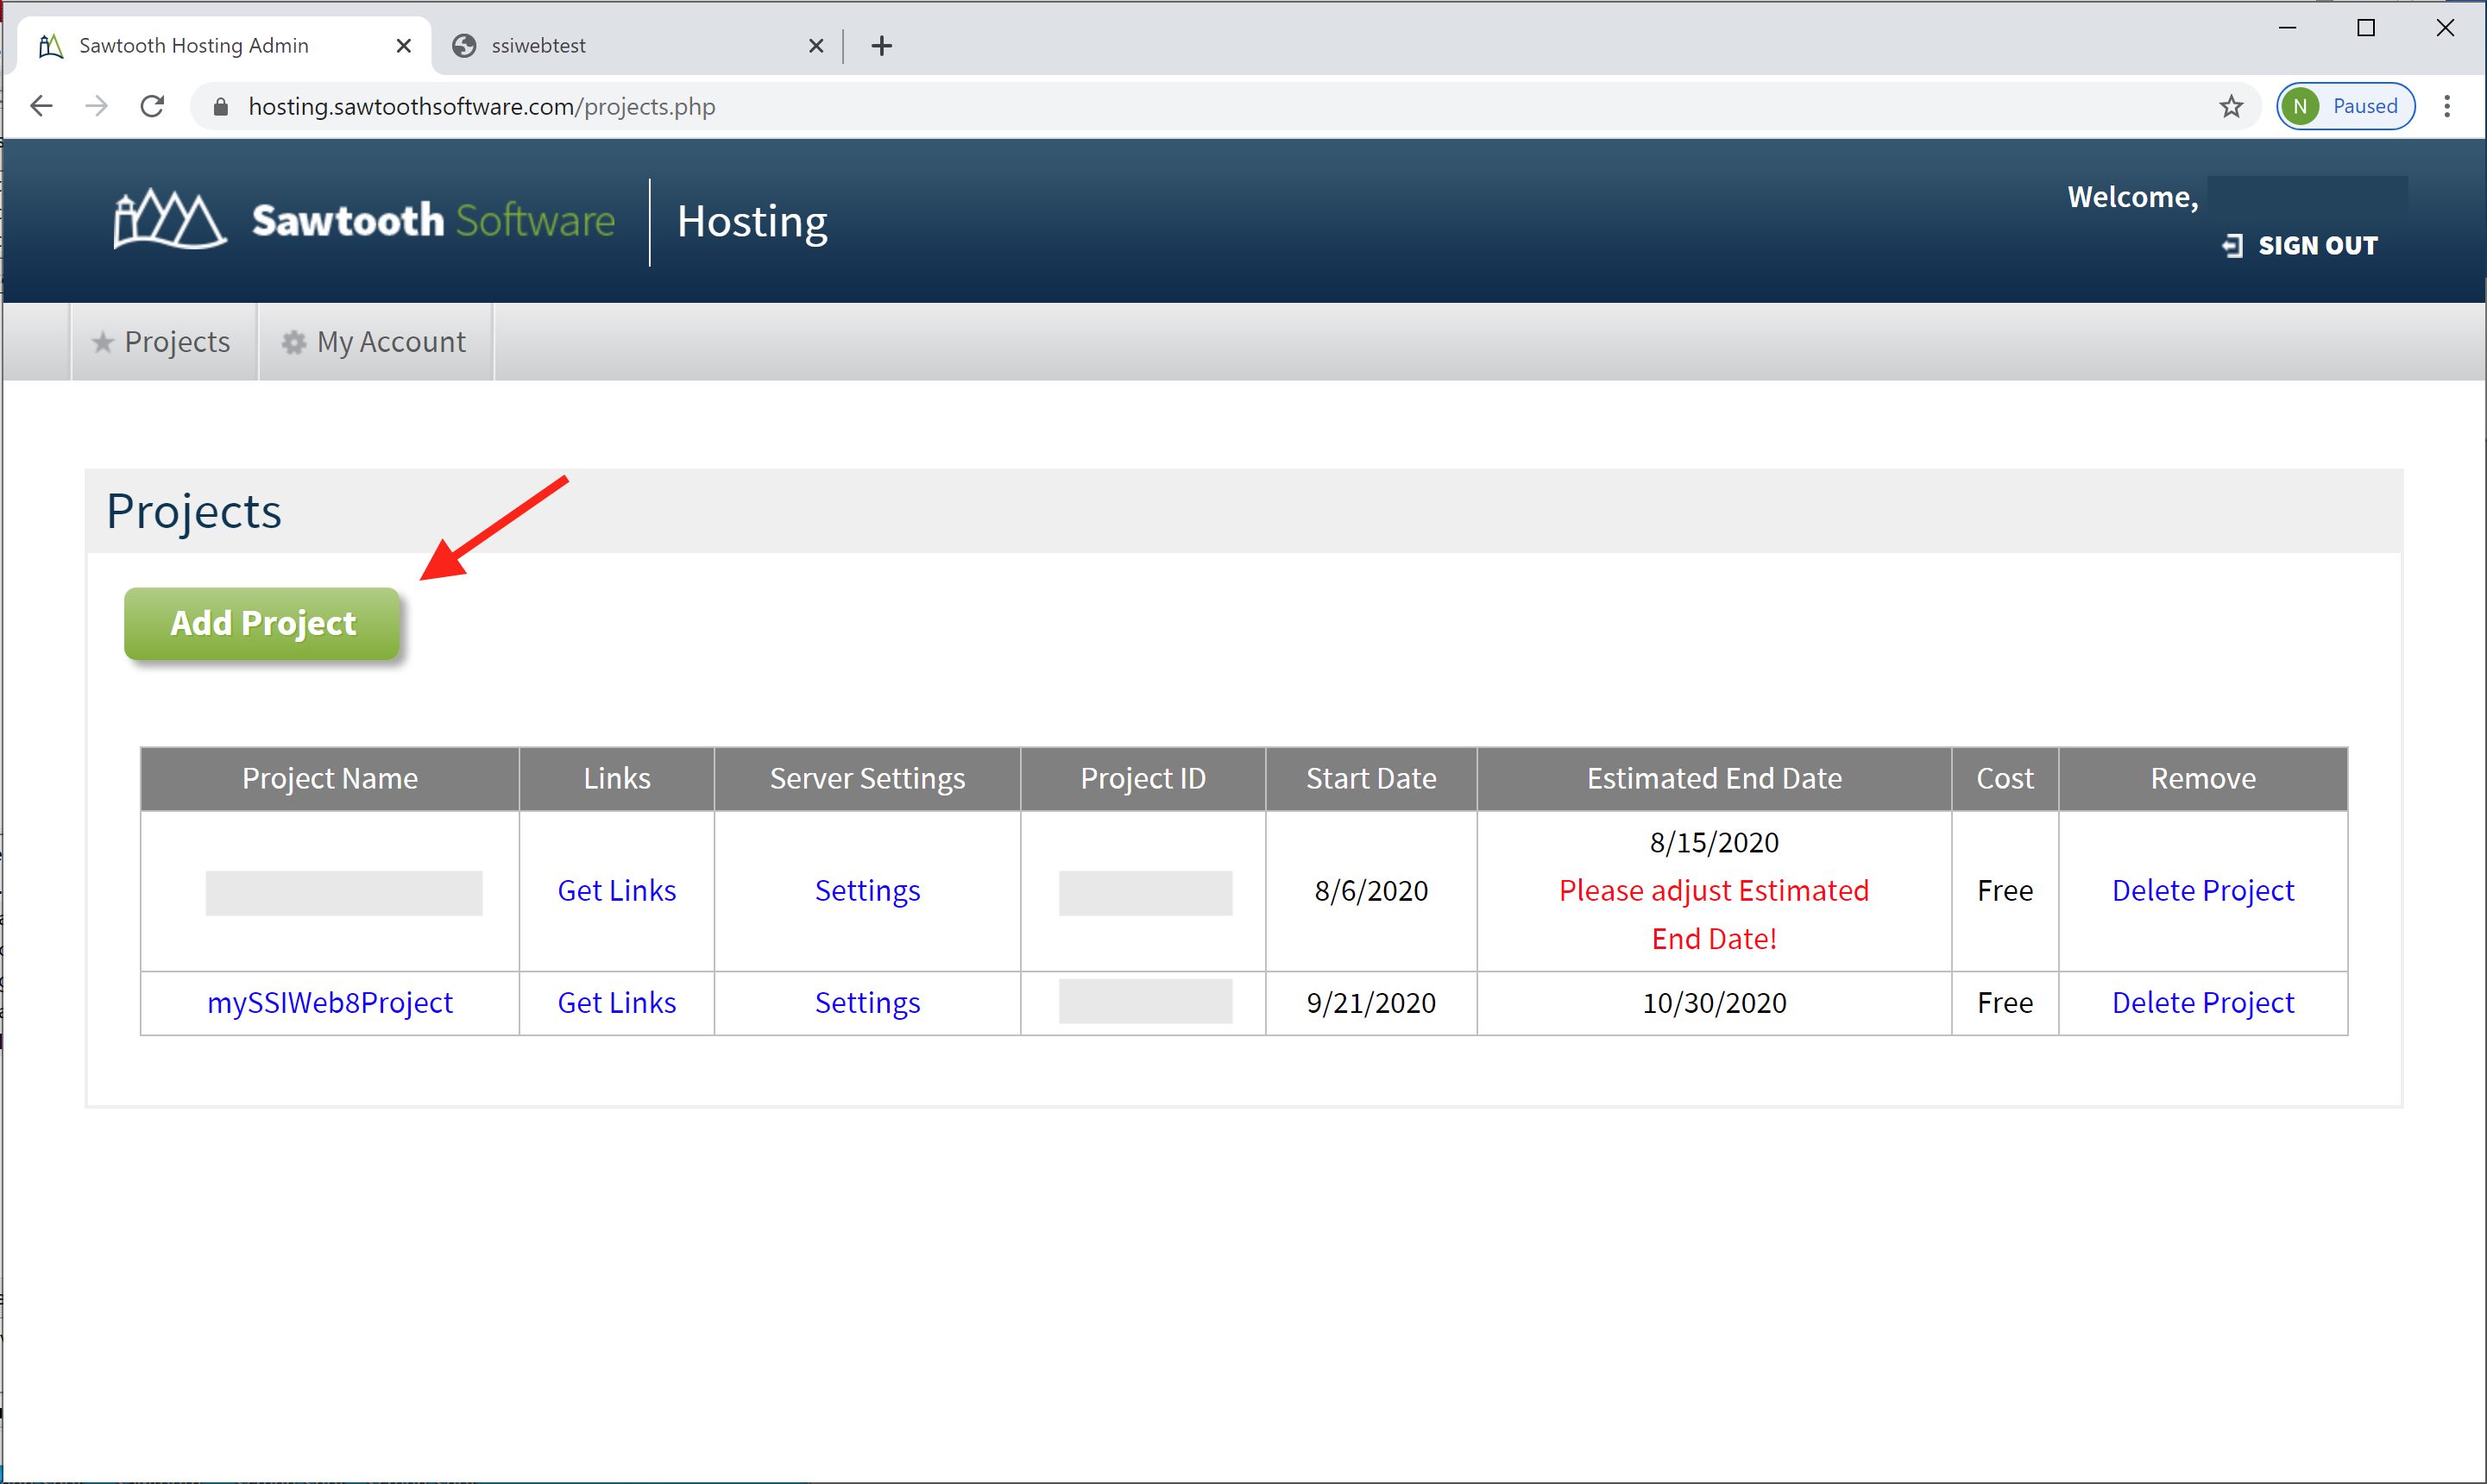 Screen shot pointing out the "Add Project" button in the Sawtooth Software hosting system.